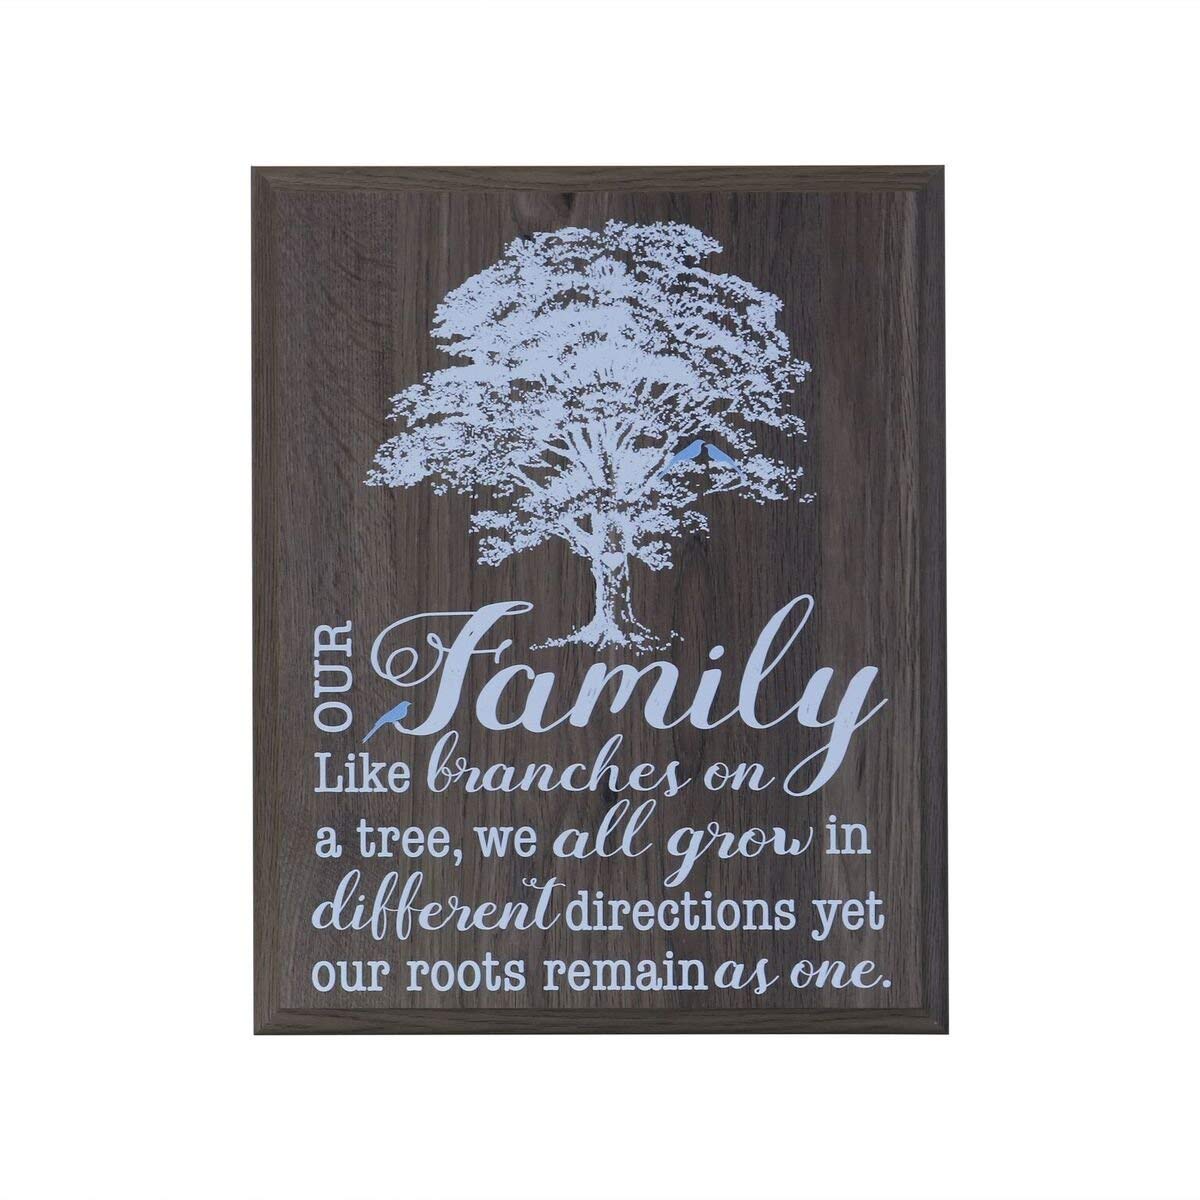 12 x 15 Wall Plaque Decor - Our Family - LifeSong Milestones